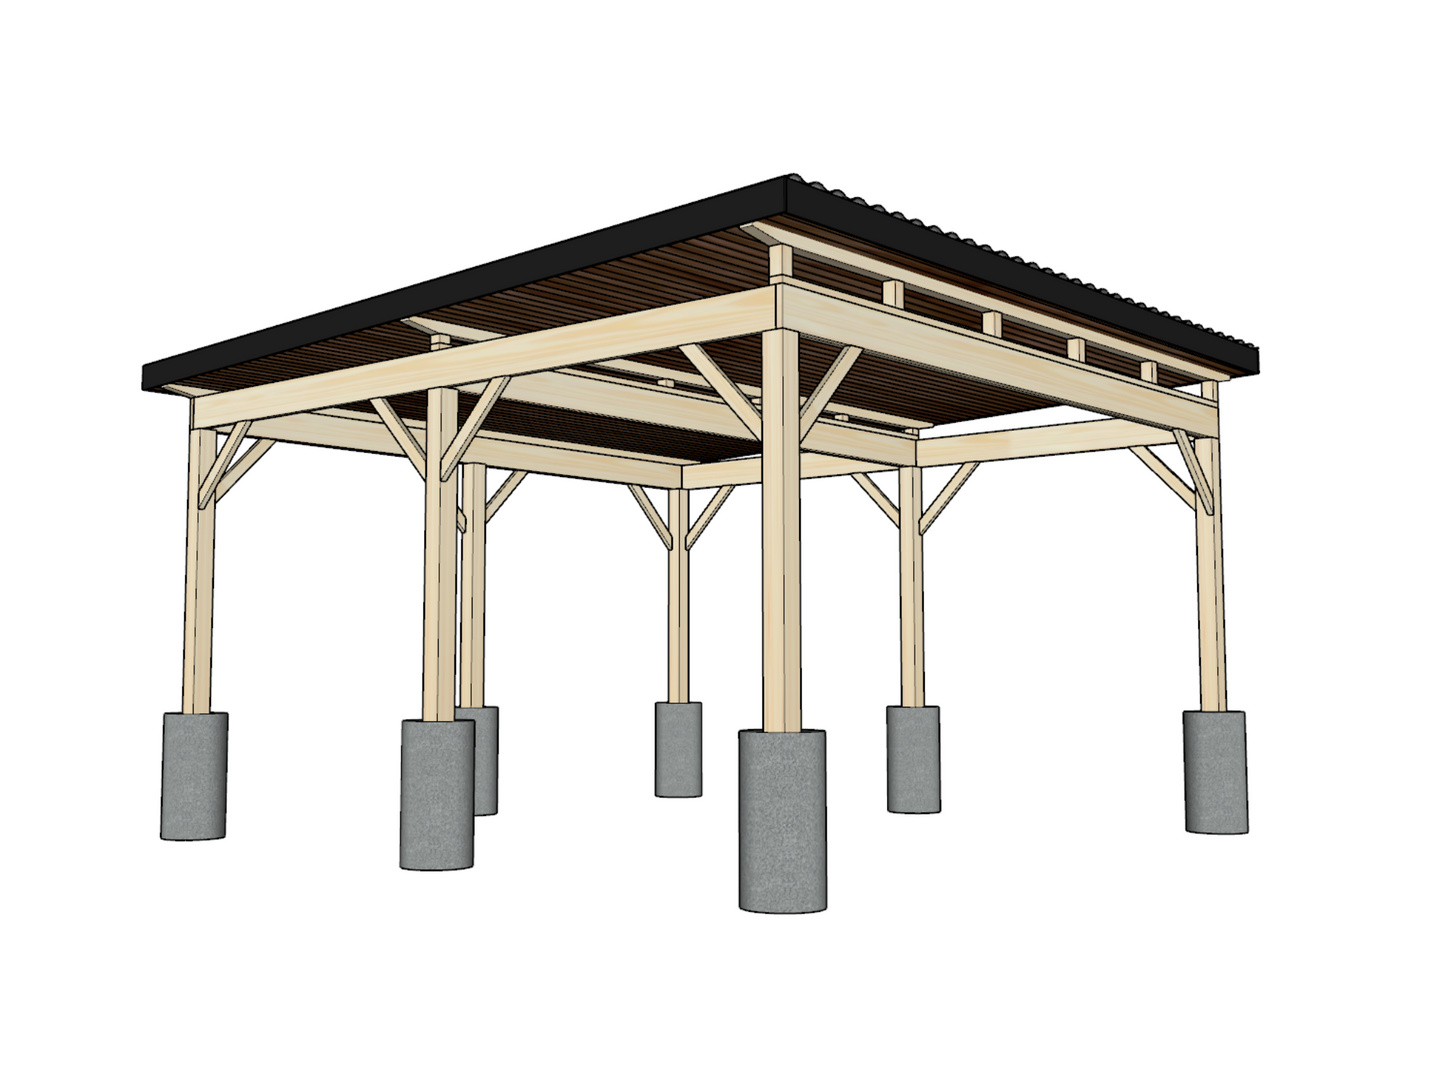 Double Carport - Step-By-Step DIY Guide and Materials List | 5.5m x 5.5m (18' x 18') - Undercover Parking, Car Shelter